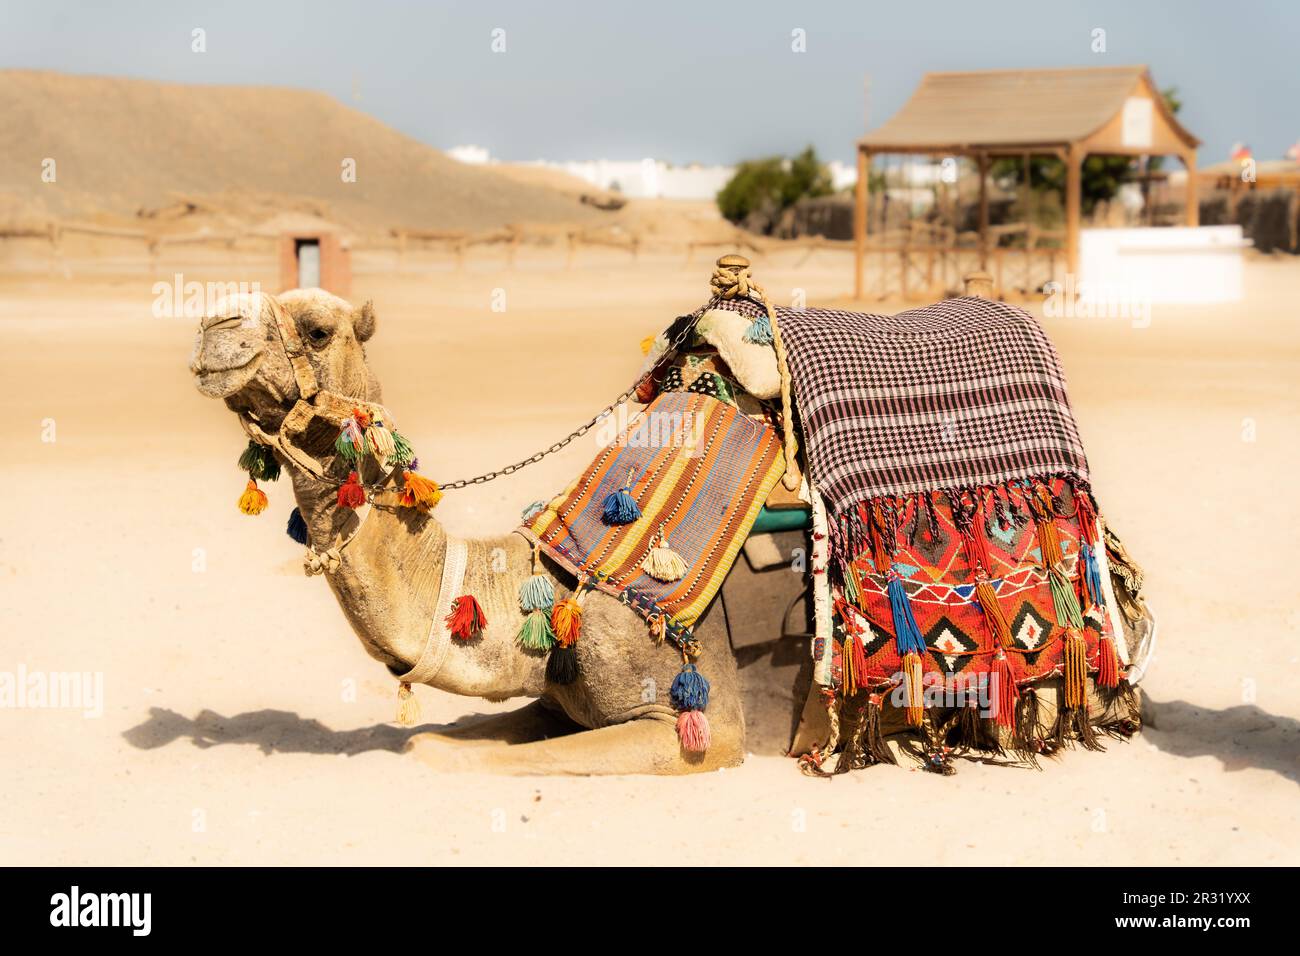 Camel sitting on the beach, riding camel in Egypt, arabian safari, vacation activities, camel saddle, bedouins, camel ride, summer activie Stock Photo